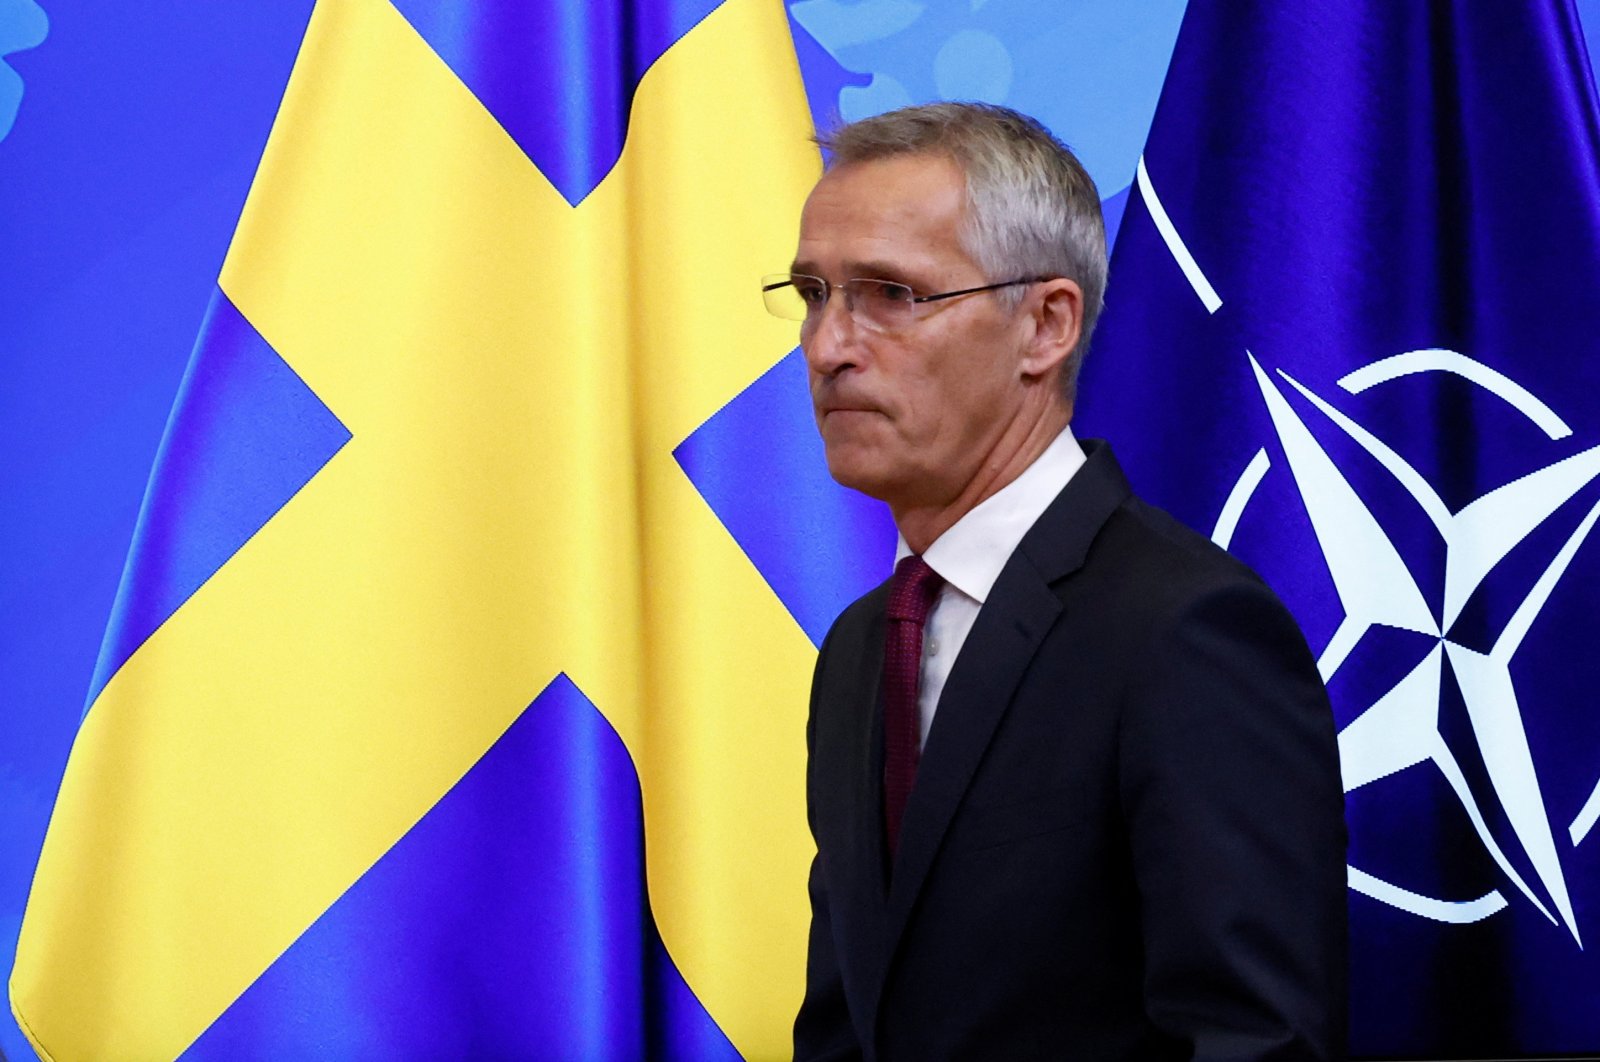 NATO Secretary-General Jens Stoltenberg arrives to hold a news conference after a meeting at the alliance&#039;s headquarters in Brussels, Belgium, Oct. 20, 2022. (REUTERS Photo)